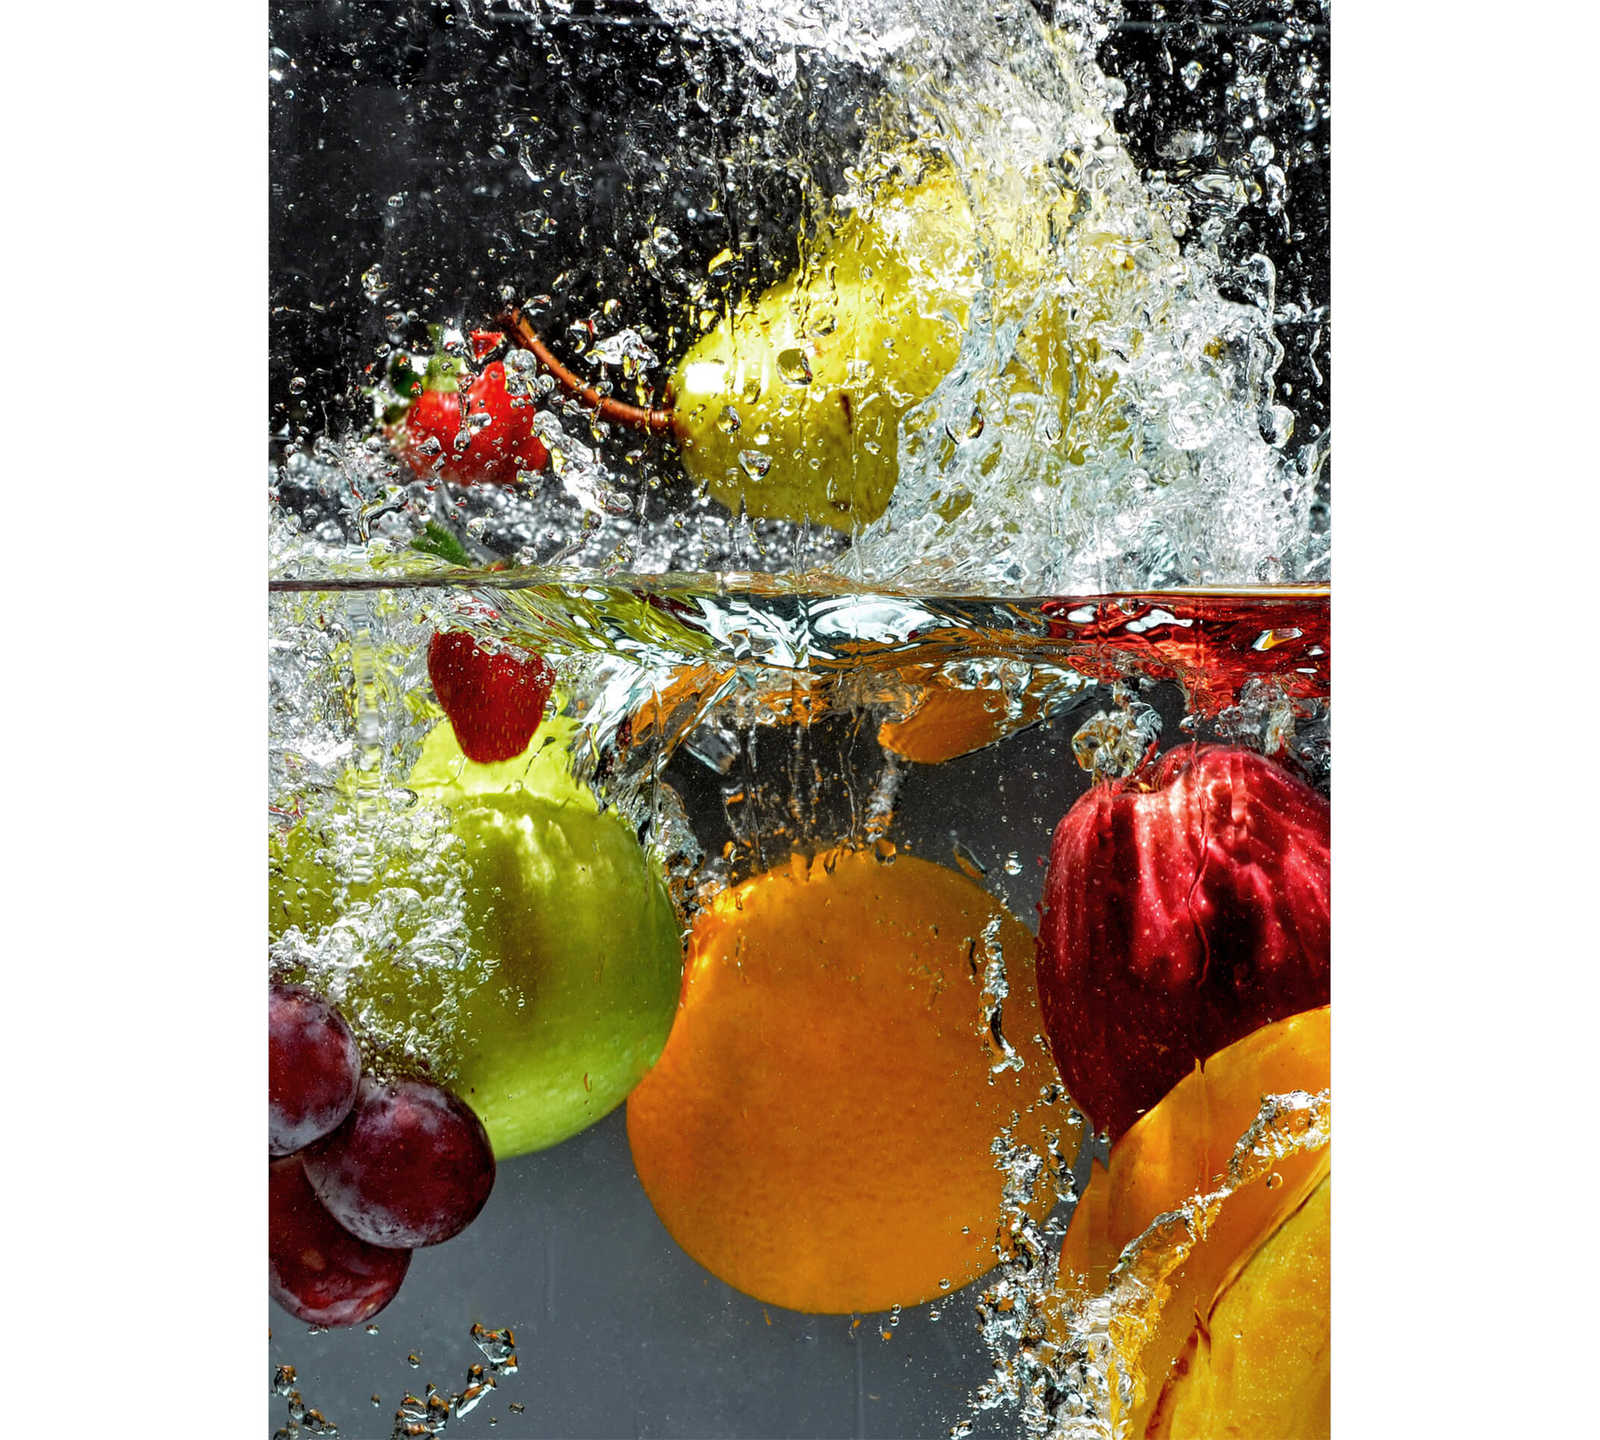         Photo wallpaper fruit in water, portrait format - colourful, yellow, red
    